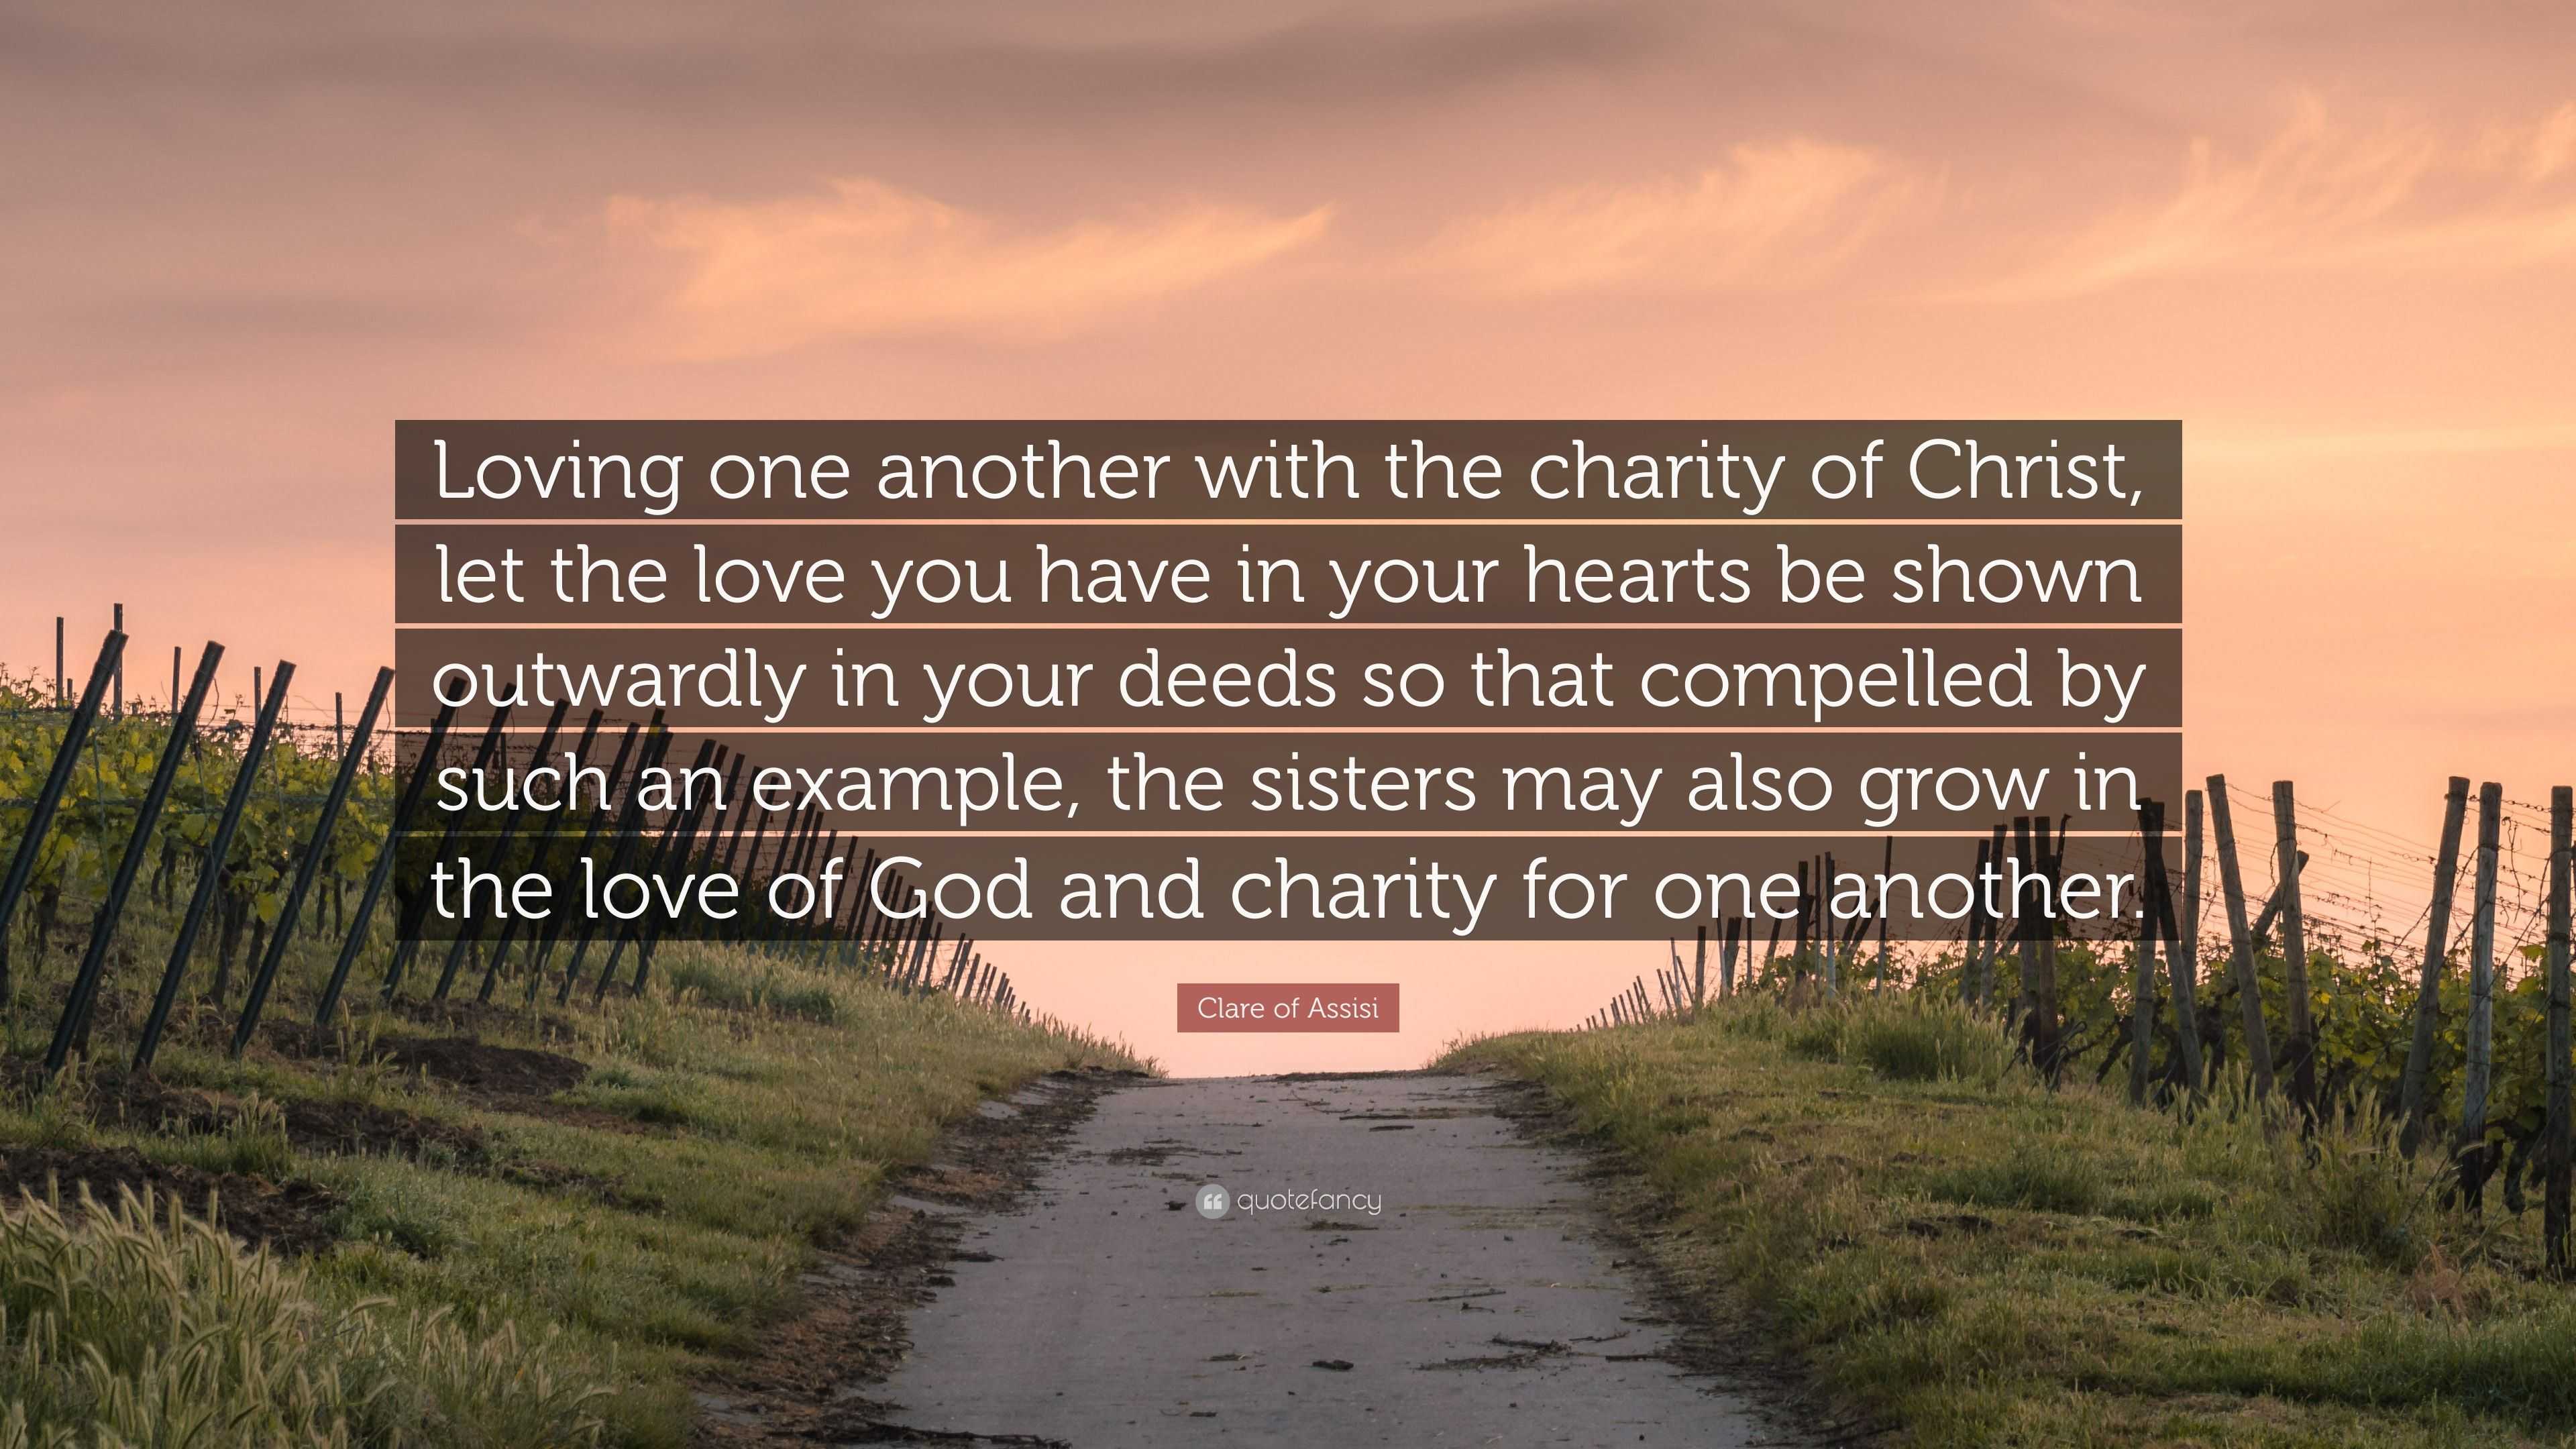 Clare of Assisi Quote “Loving one another with the charity of Christ let